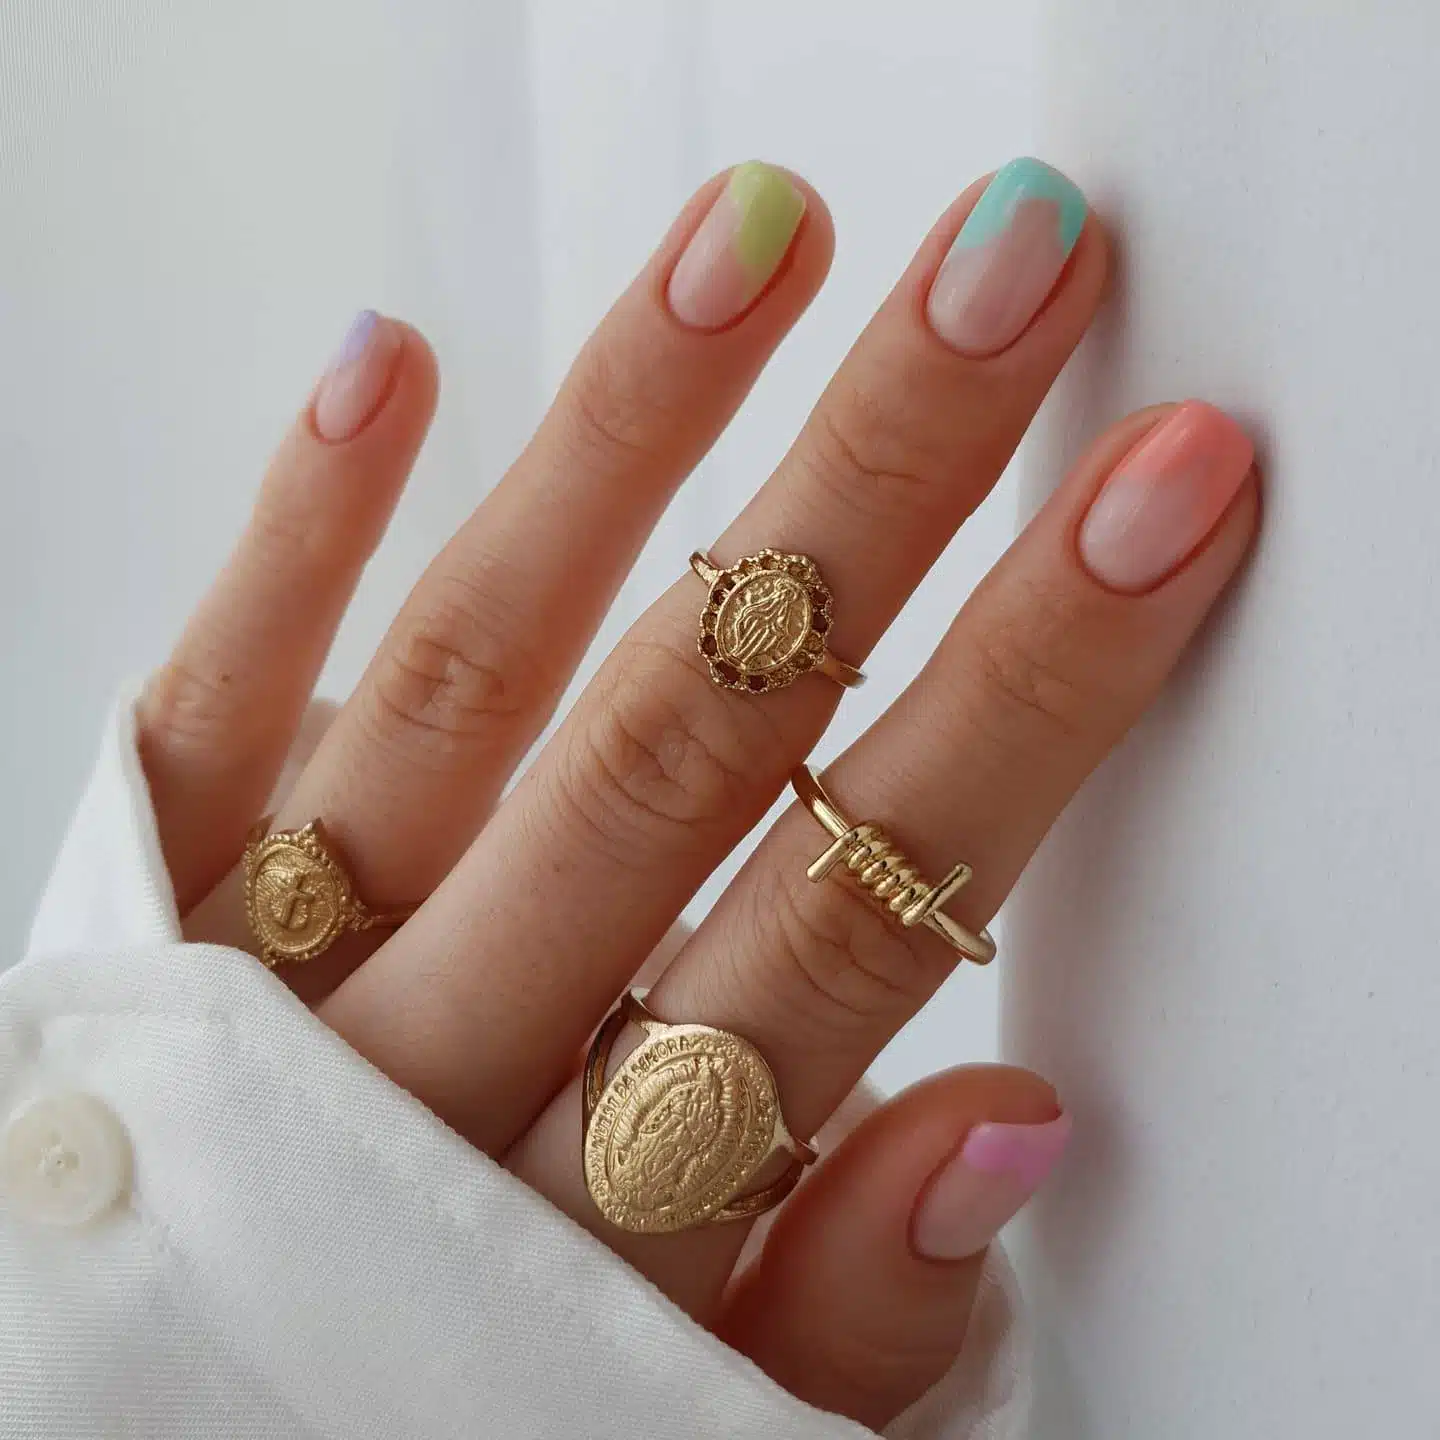 30 Chic Pastel Nail Designs To Look Pretty All Year Round - 221